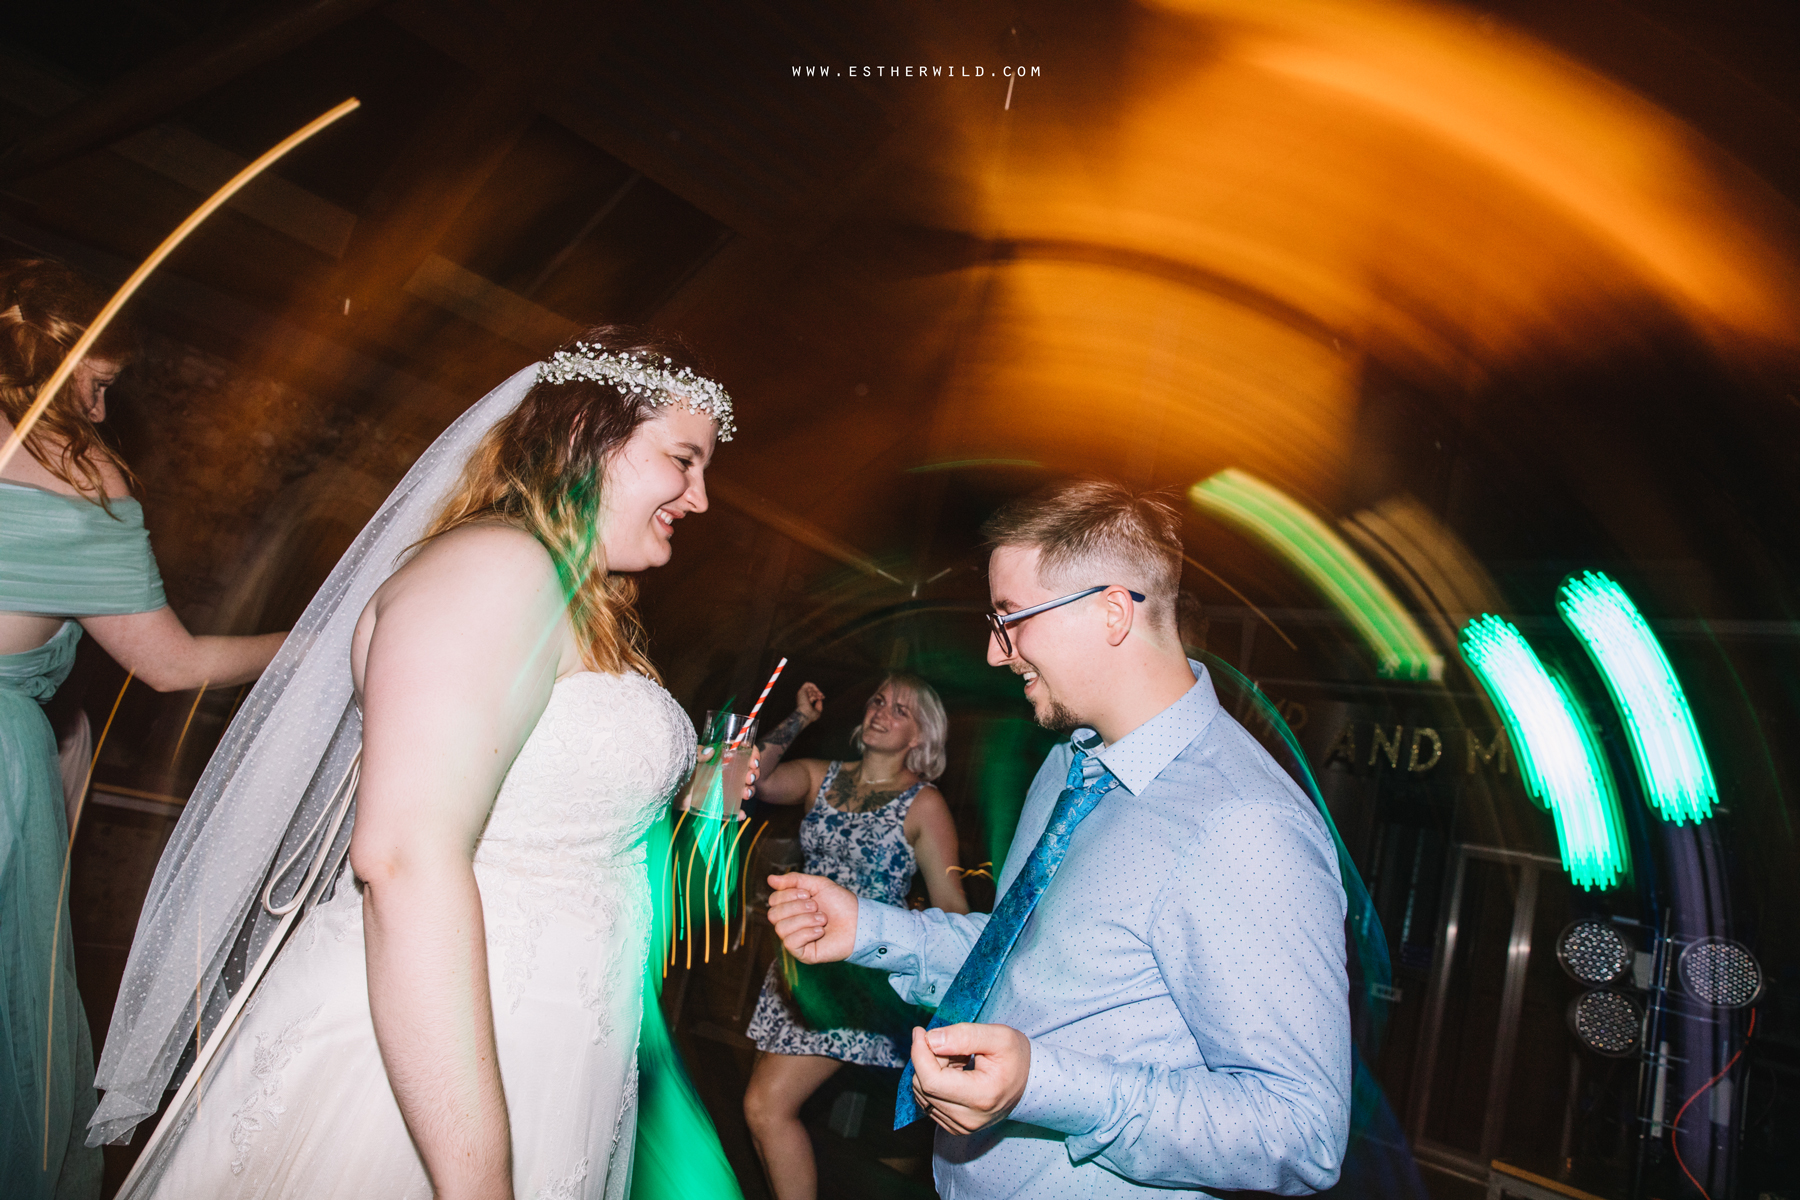 Norwich_Castle_Arcade_Grosvenor_Chip_Birdcage_Cathedral_Cloisters_Refectory_Wedding_Photography_Esther_Wild_Photographer_Norfolk_Kings_Lynn_3R8A3330.jpg